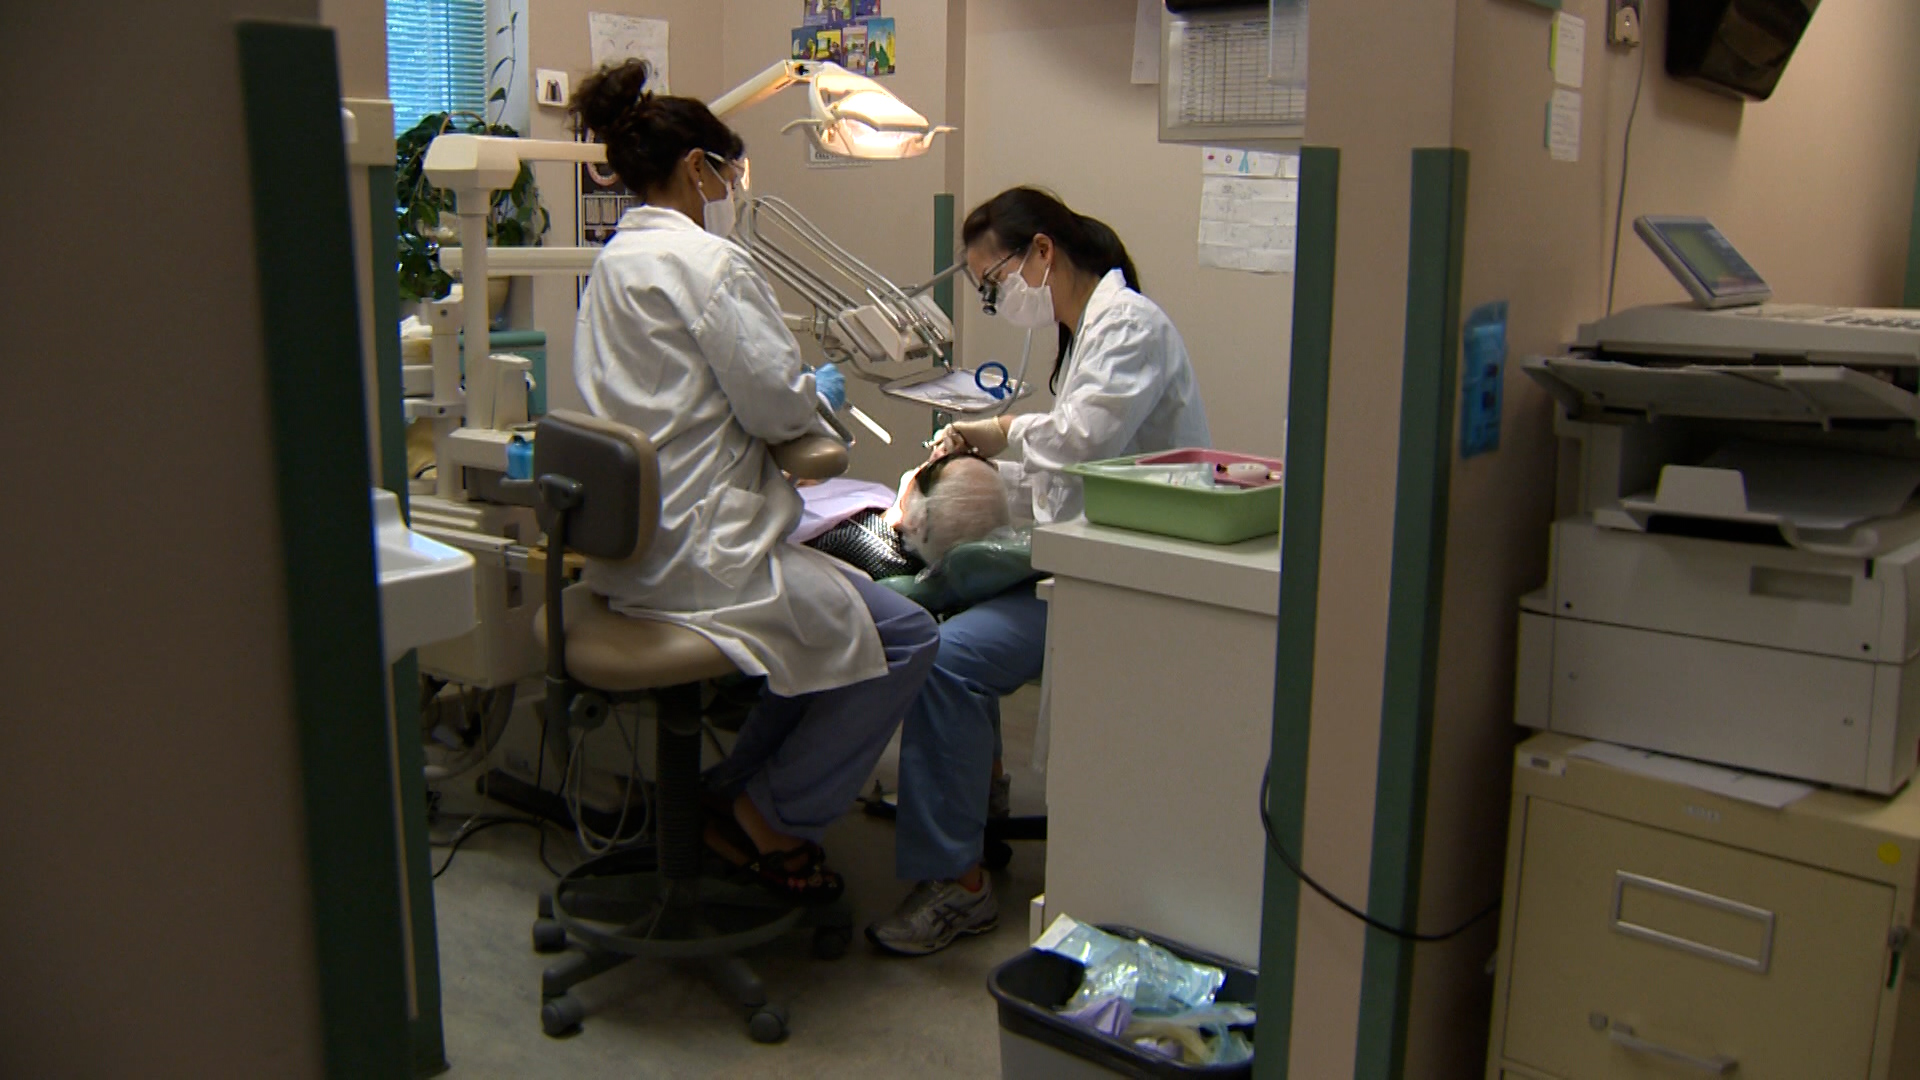 Kingston public health says dental fund could be out of money in months